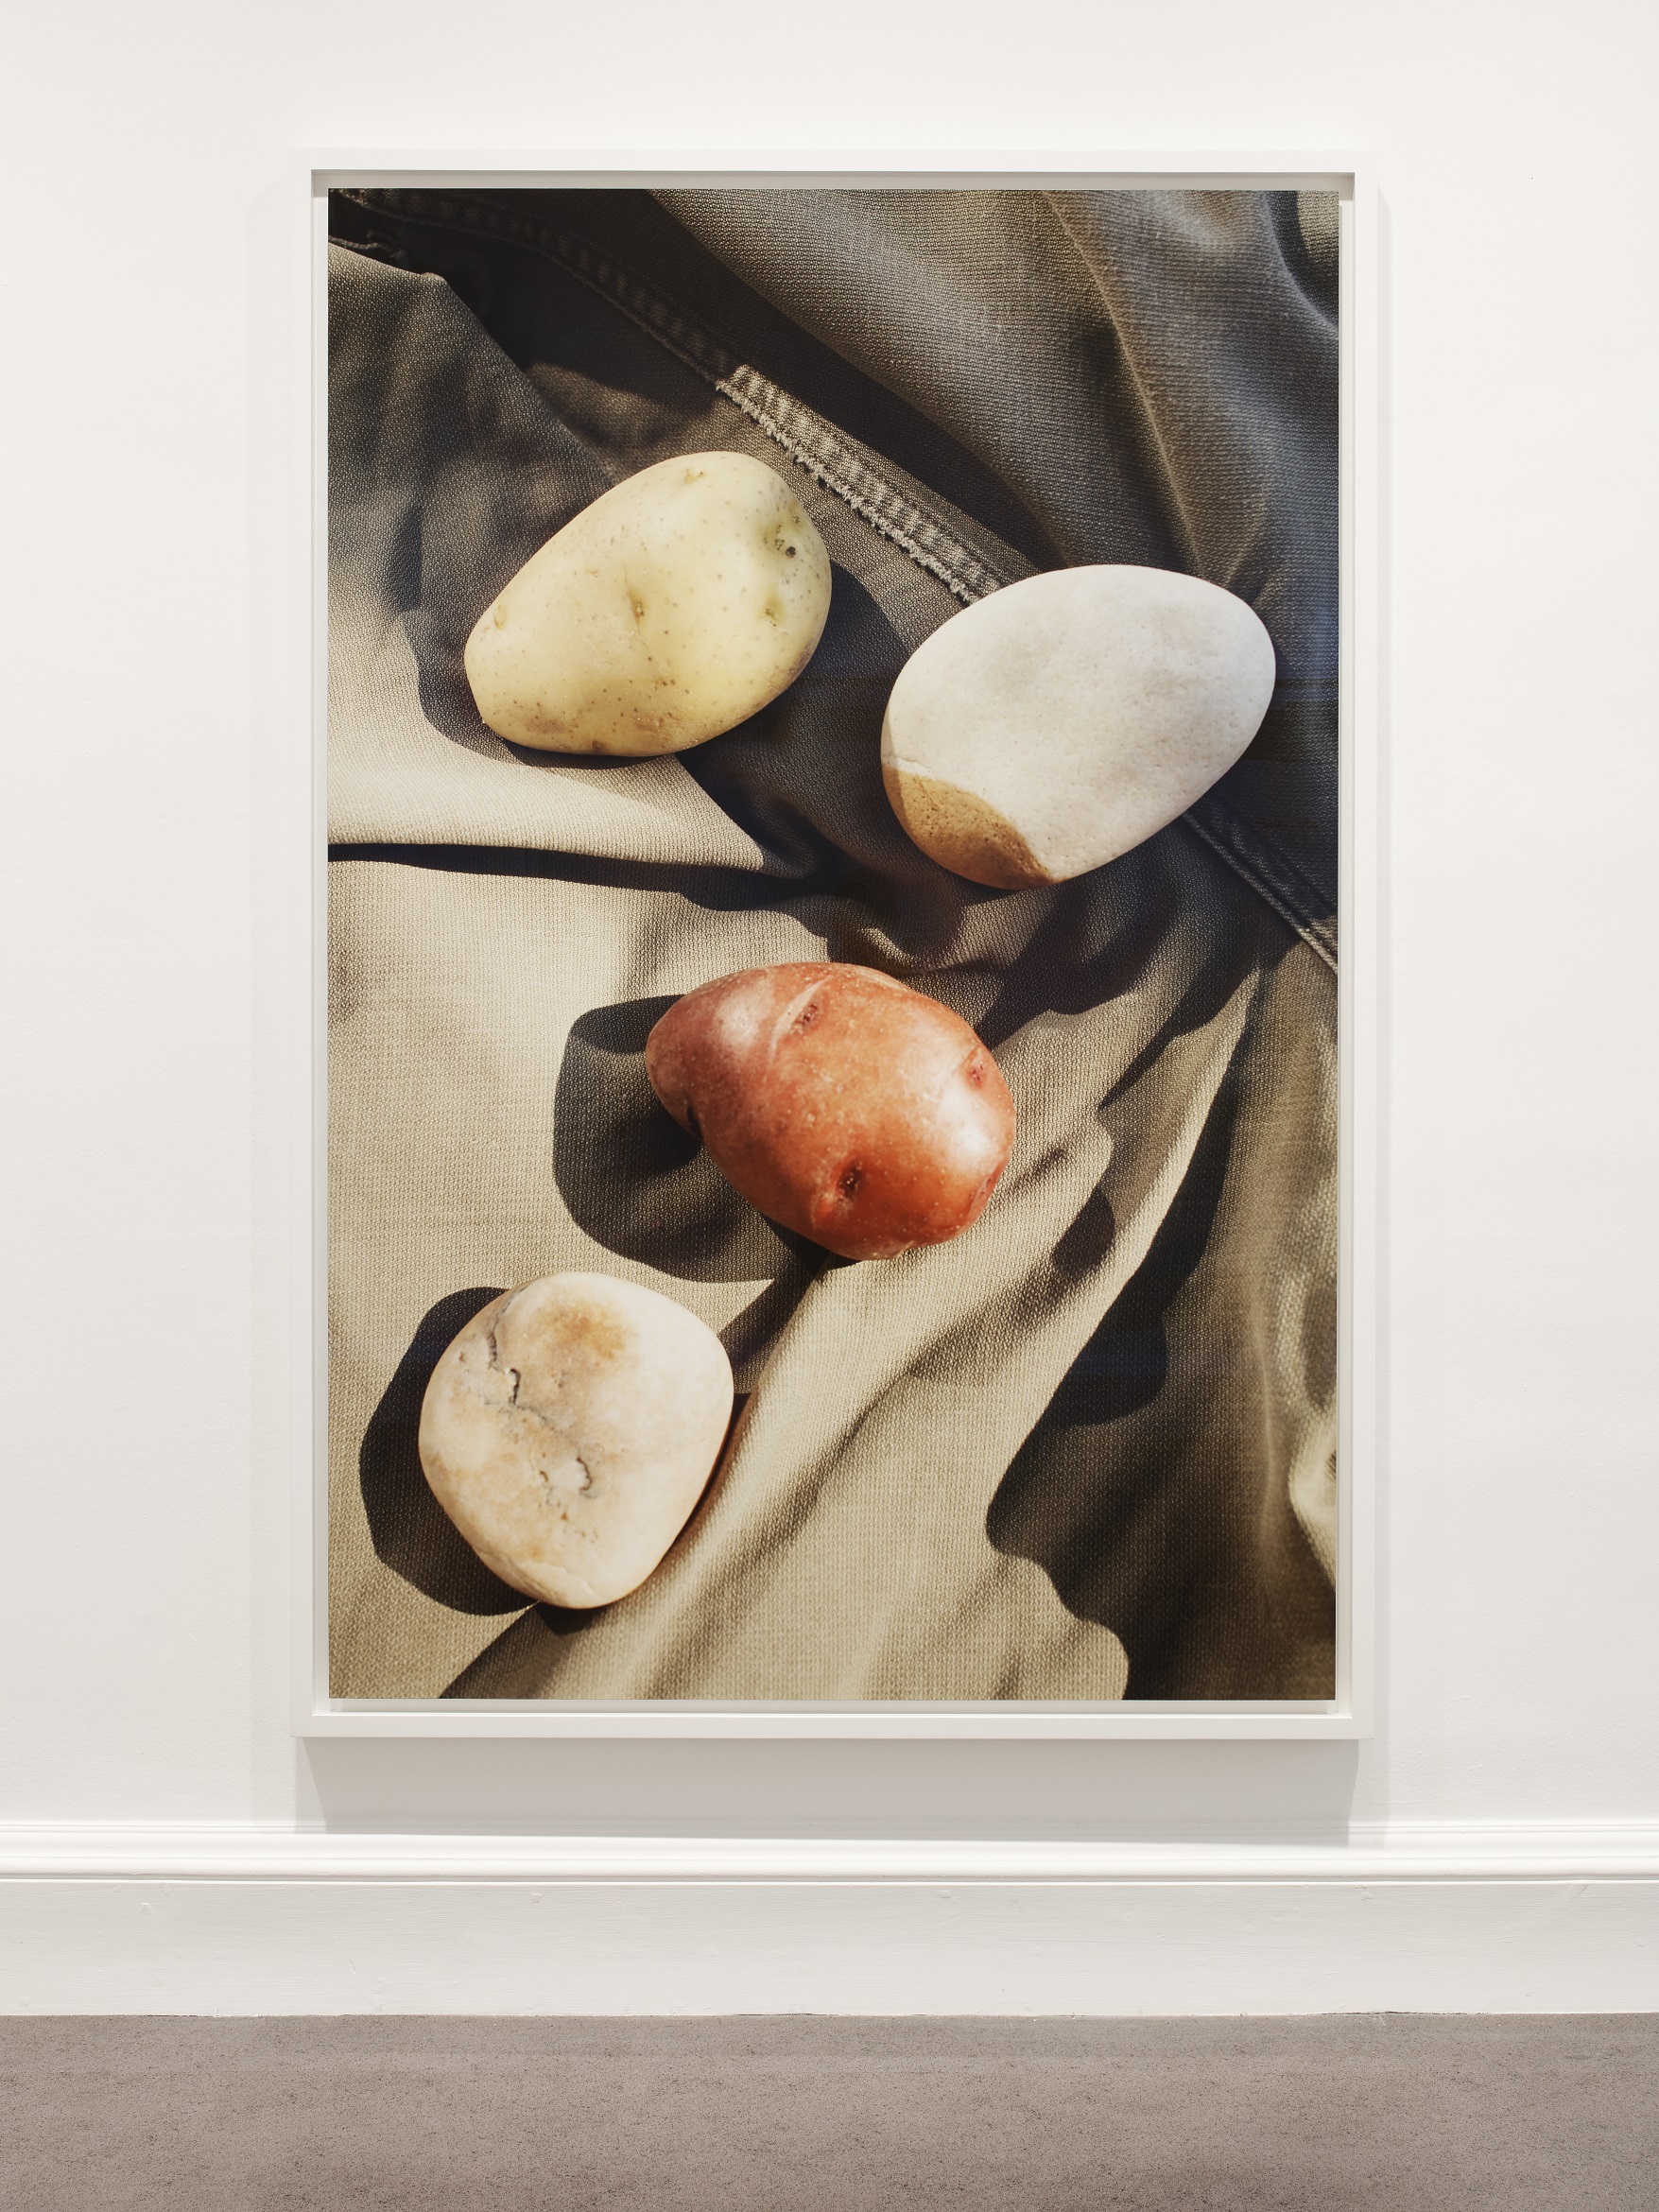 What is Wolfgang Tillmans' Still Life series all about?